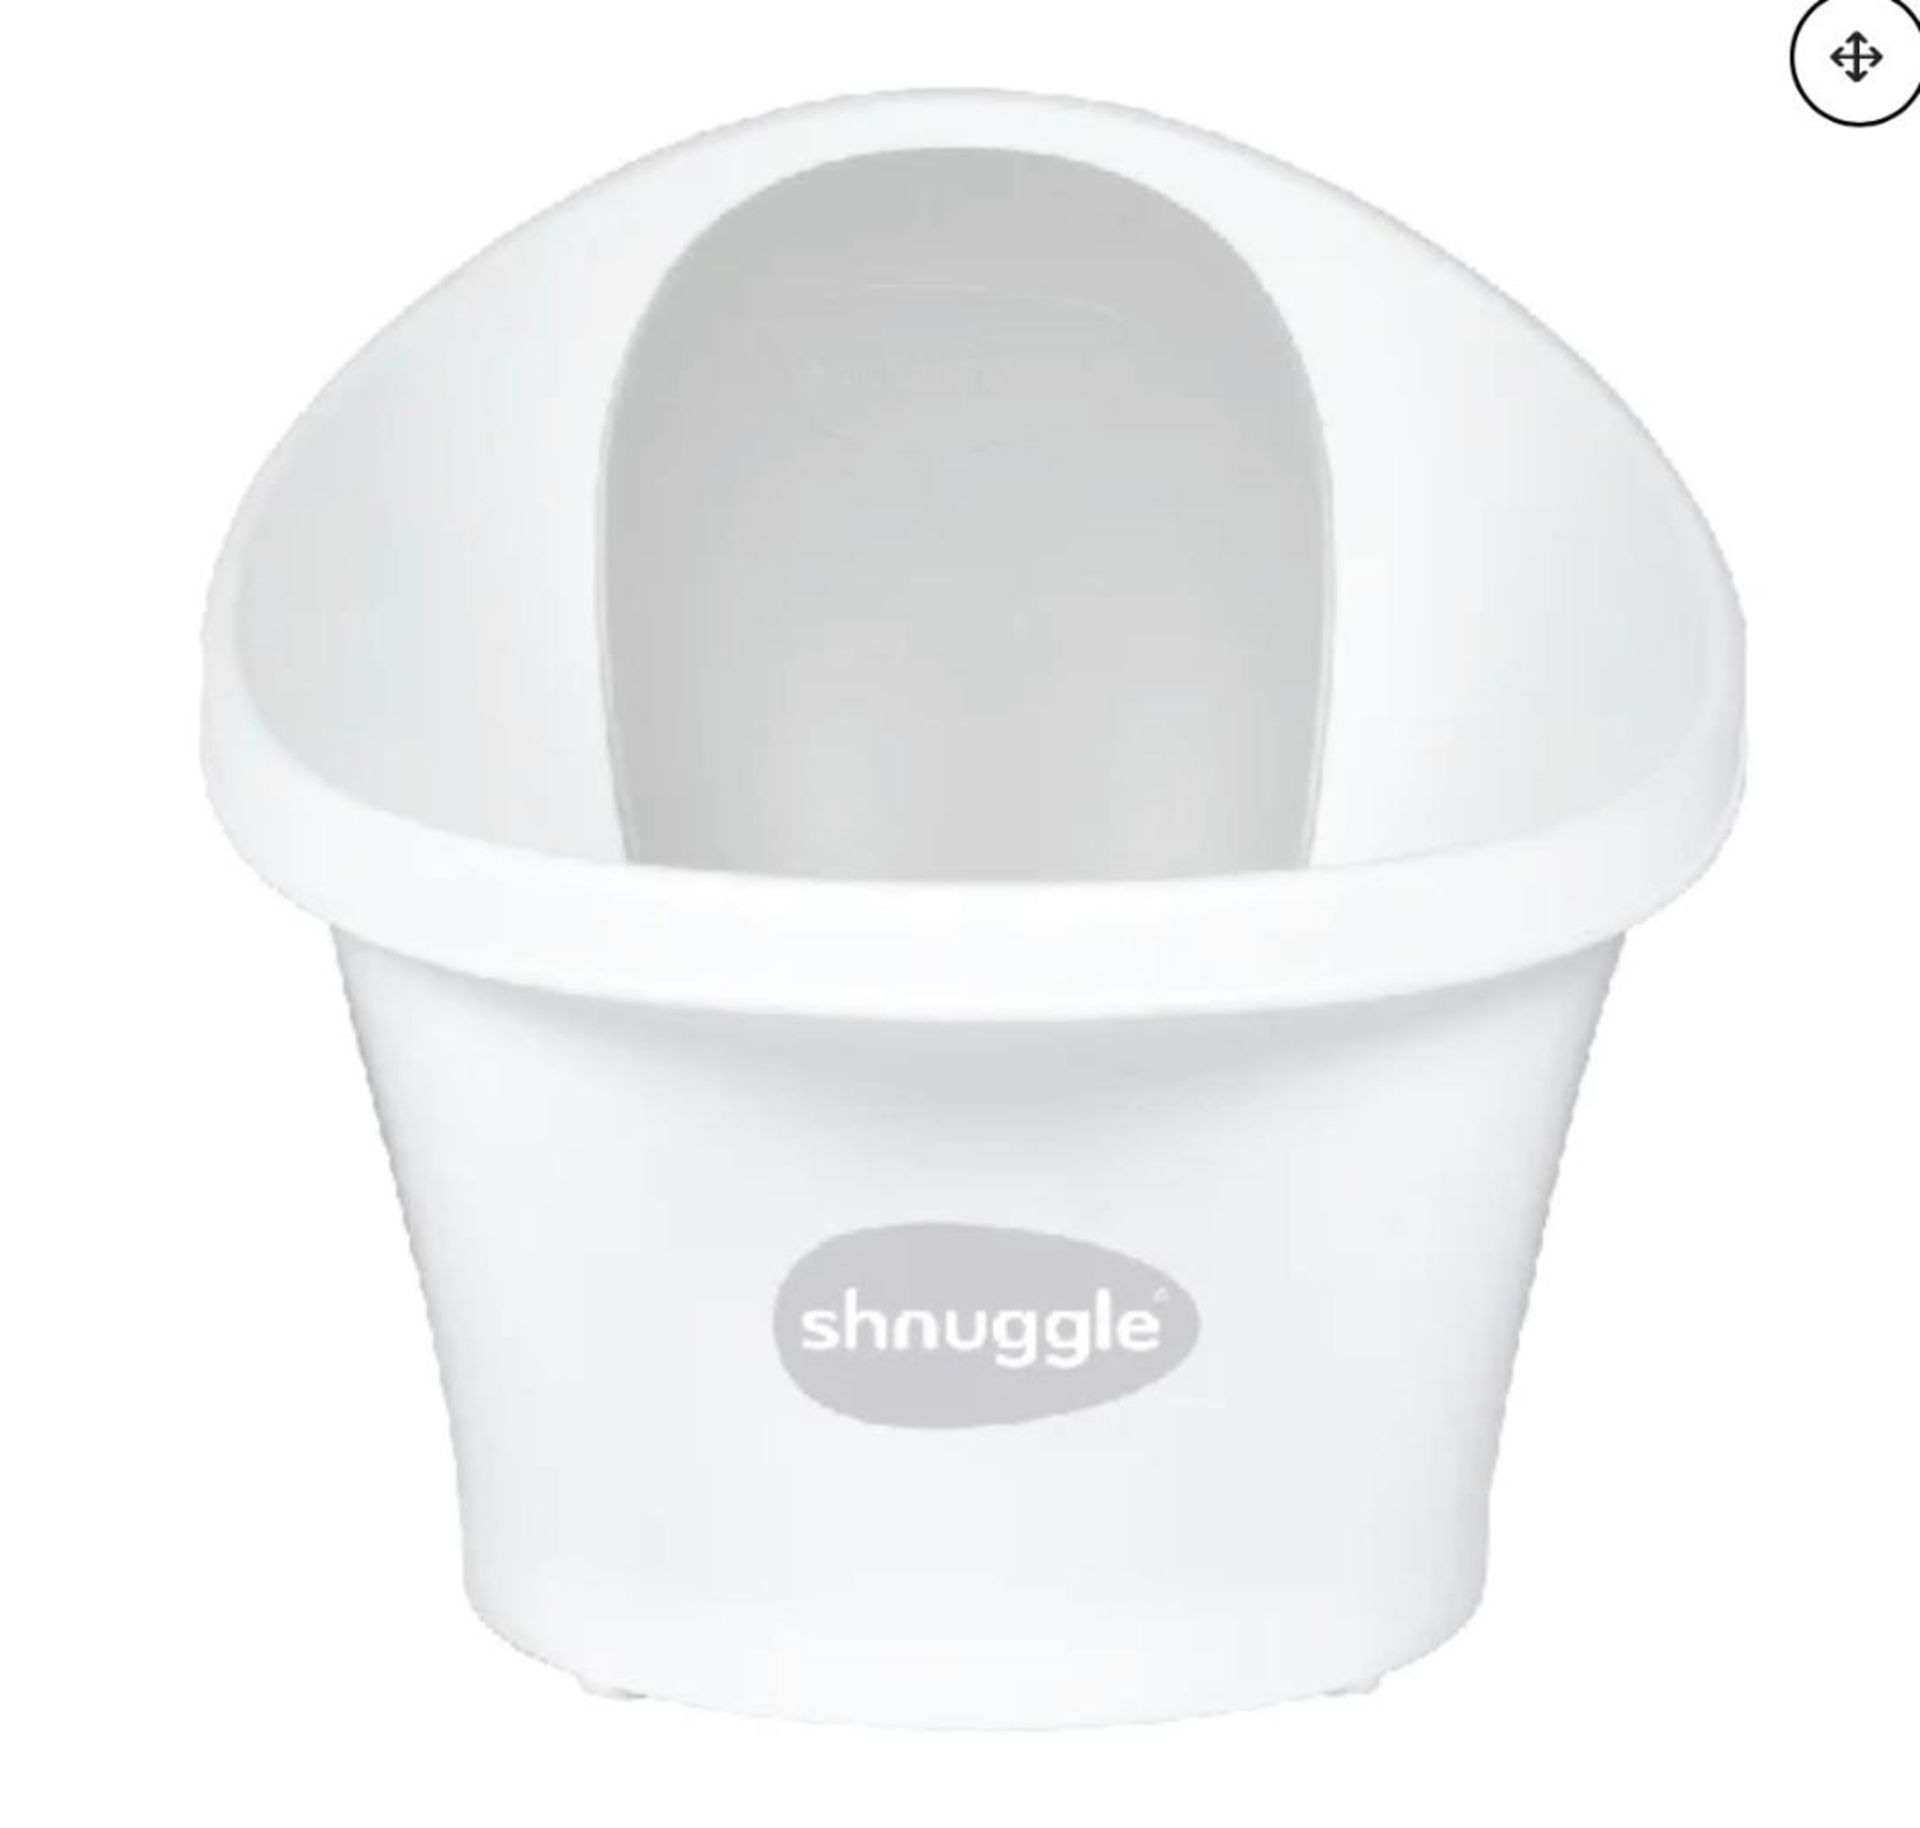 BRAND NEW PACKAGED SHNUGGLE BABY BATH IN WHITE/GREY RRP £20 (Saleroom location: F12)